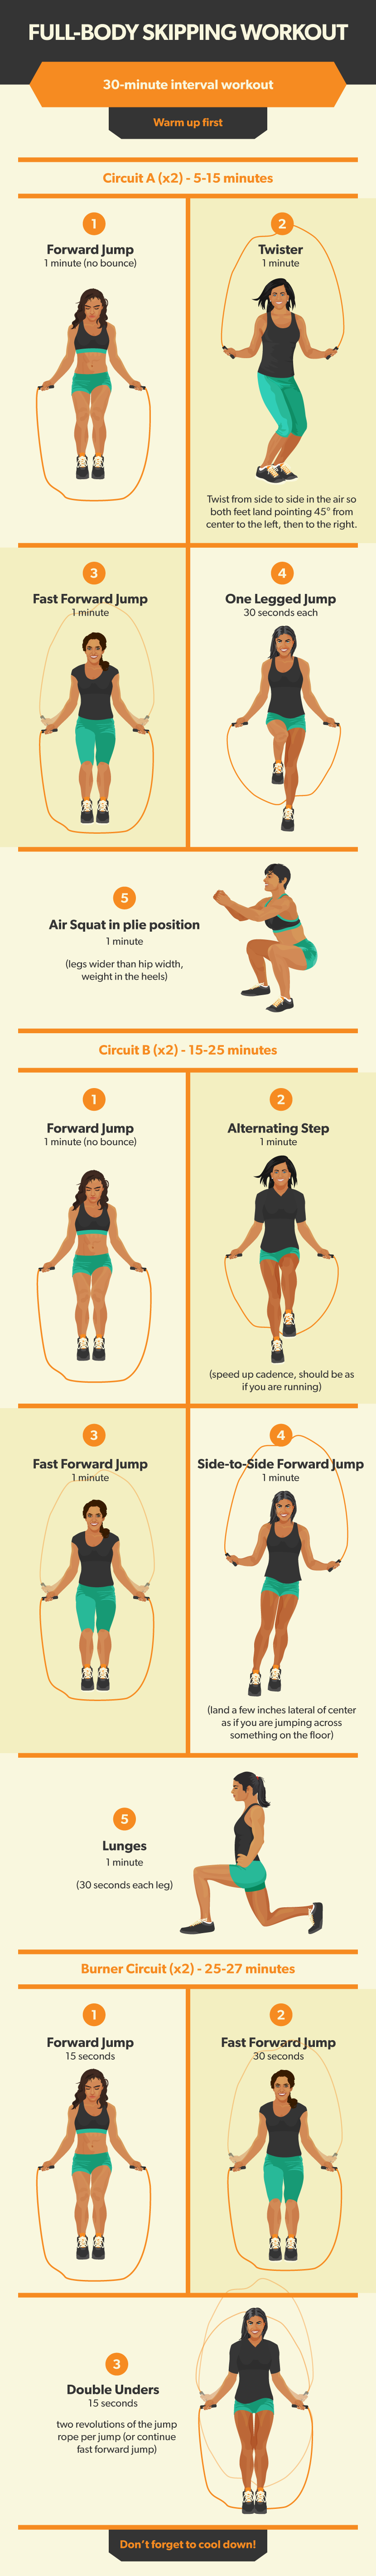 how to jump rope properly